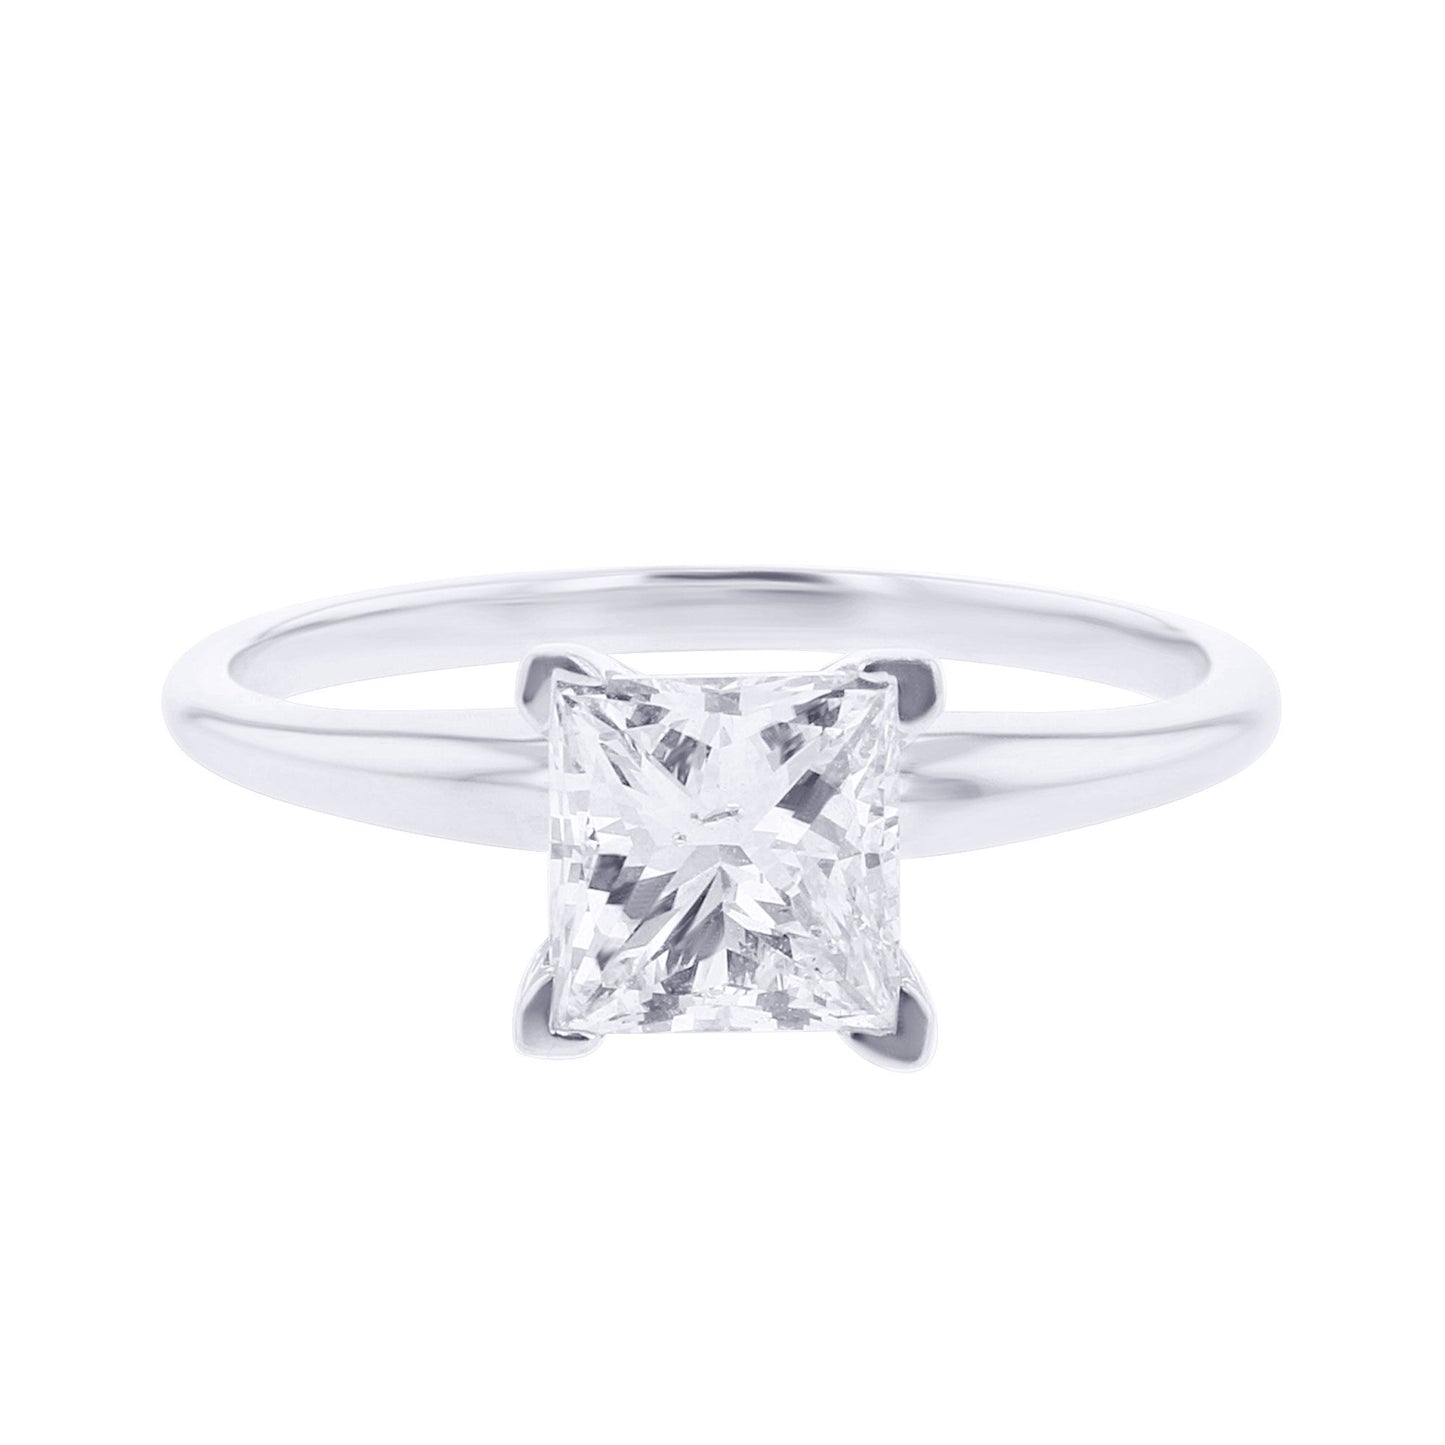 Classic Princess Solitaire Ready for Love Diamond Engagement Ring 1 1/2ct